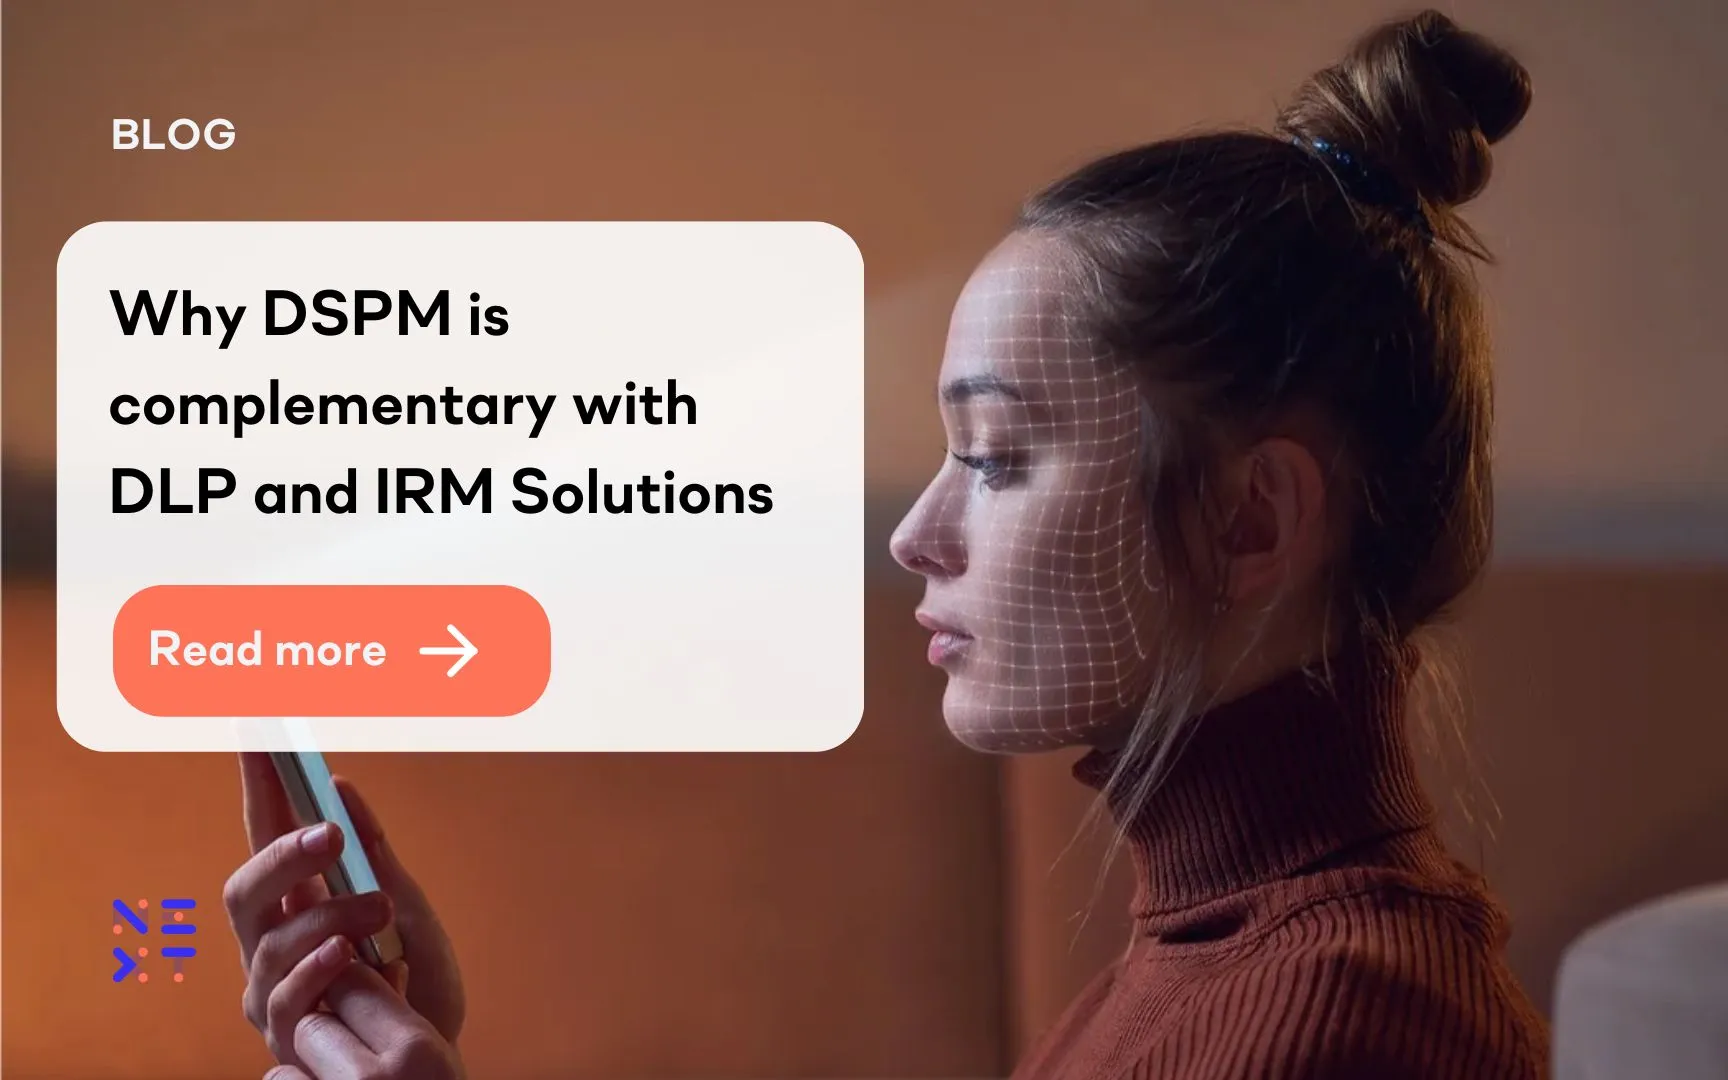 Why DSPM is complementary with DLP and IRM Solutions